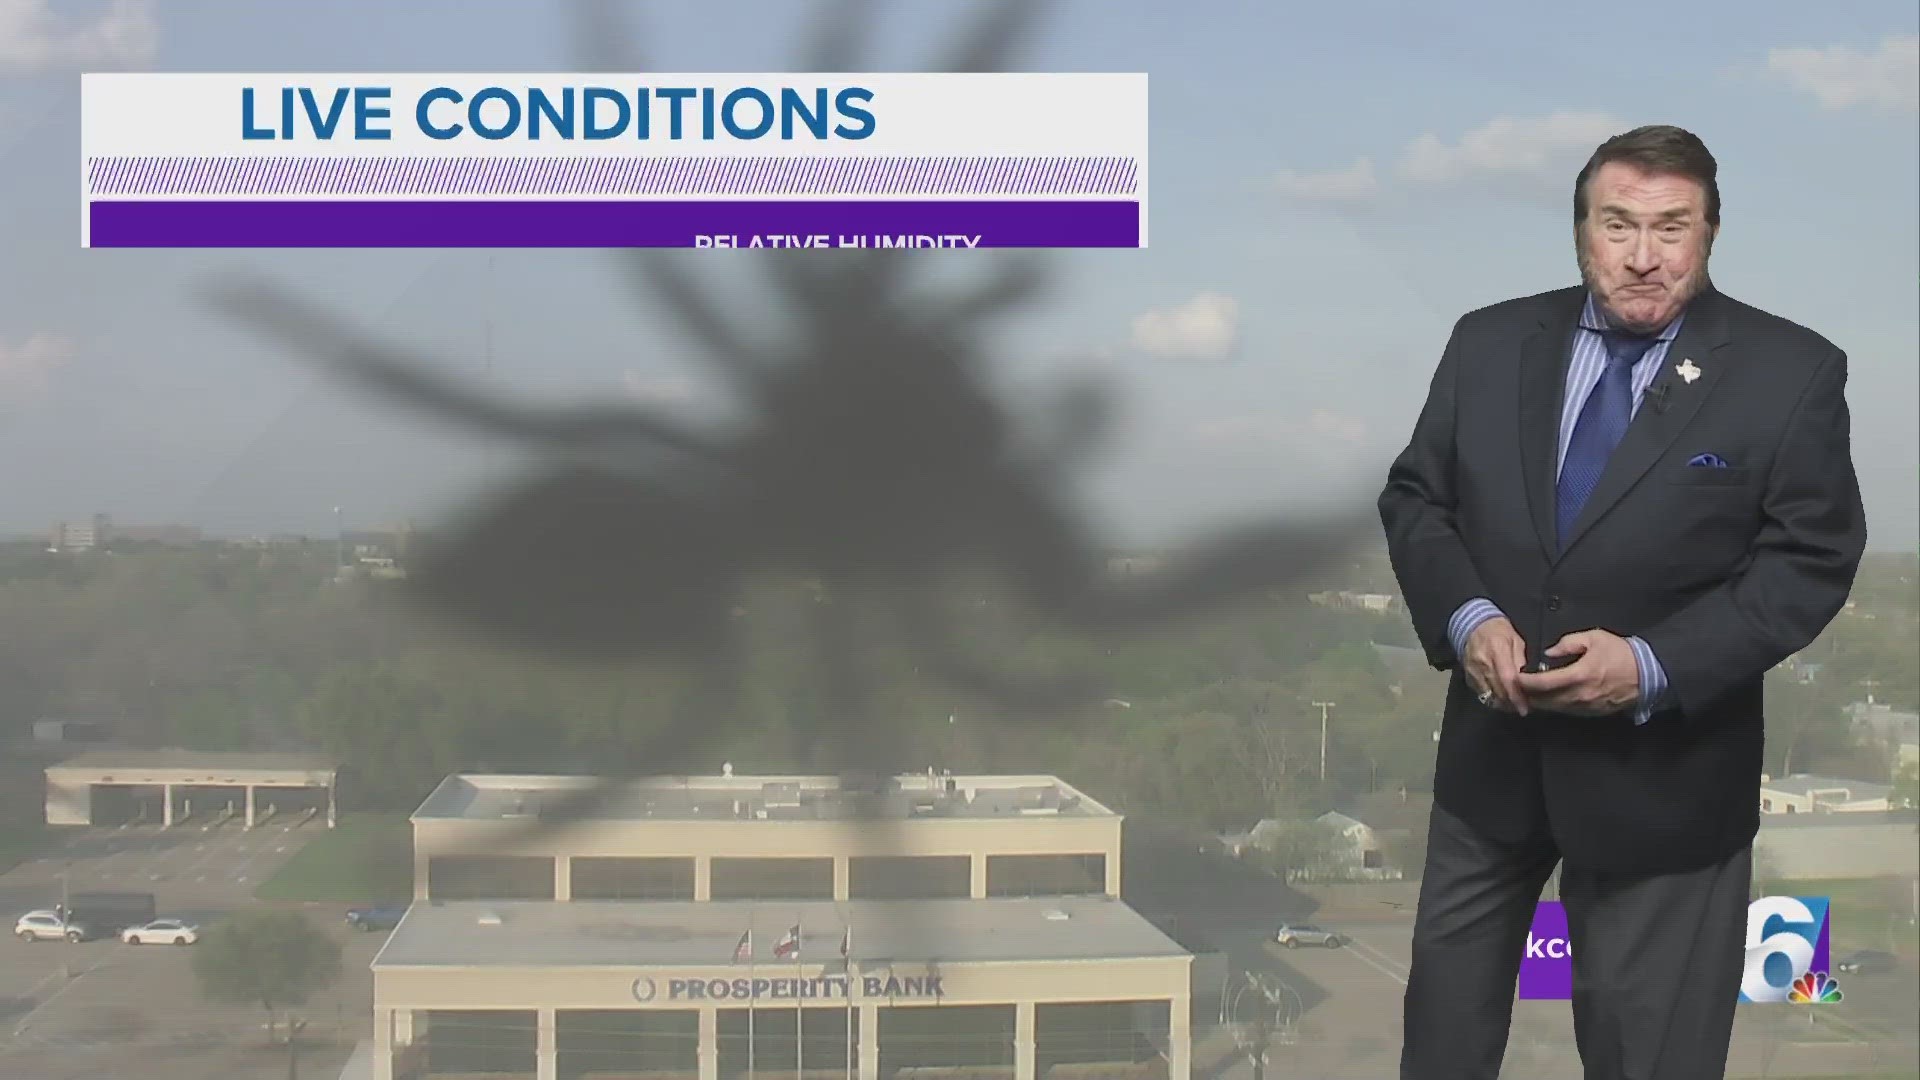 A large bug took a liking to our live weather camera, attempting to intimidate Chief Meteorologist Andy Andersen.